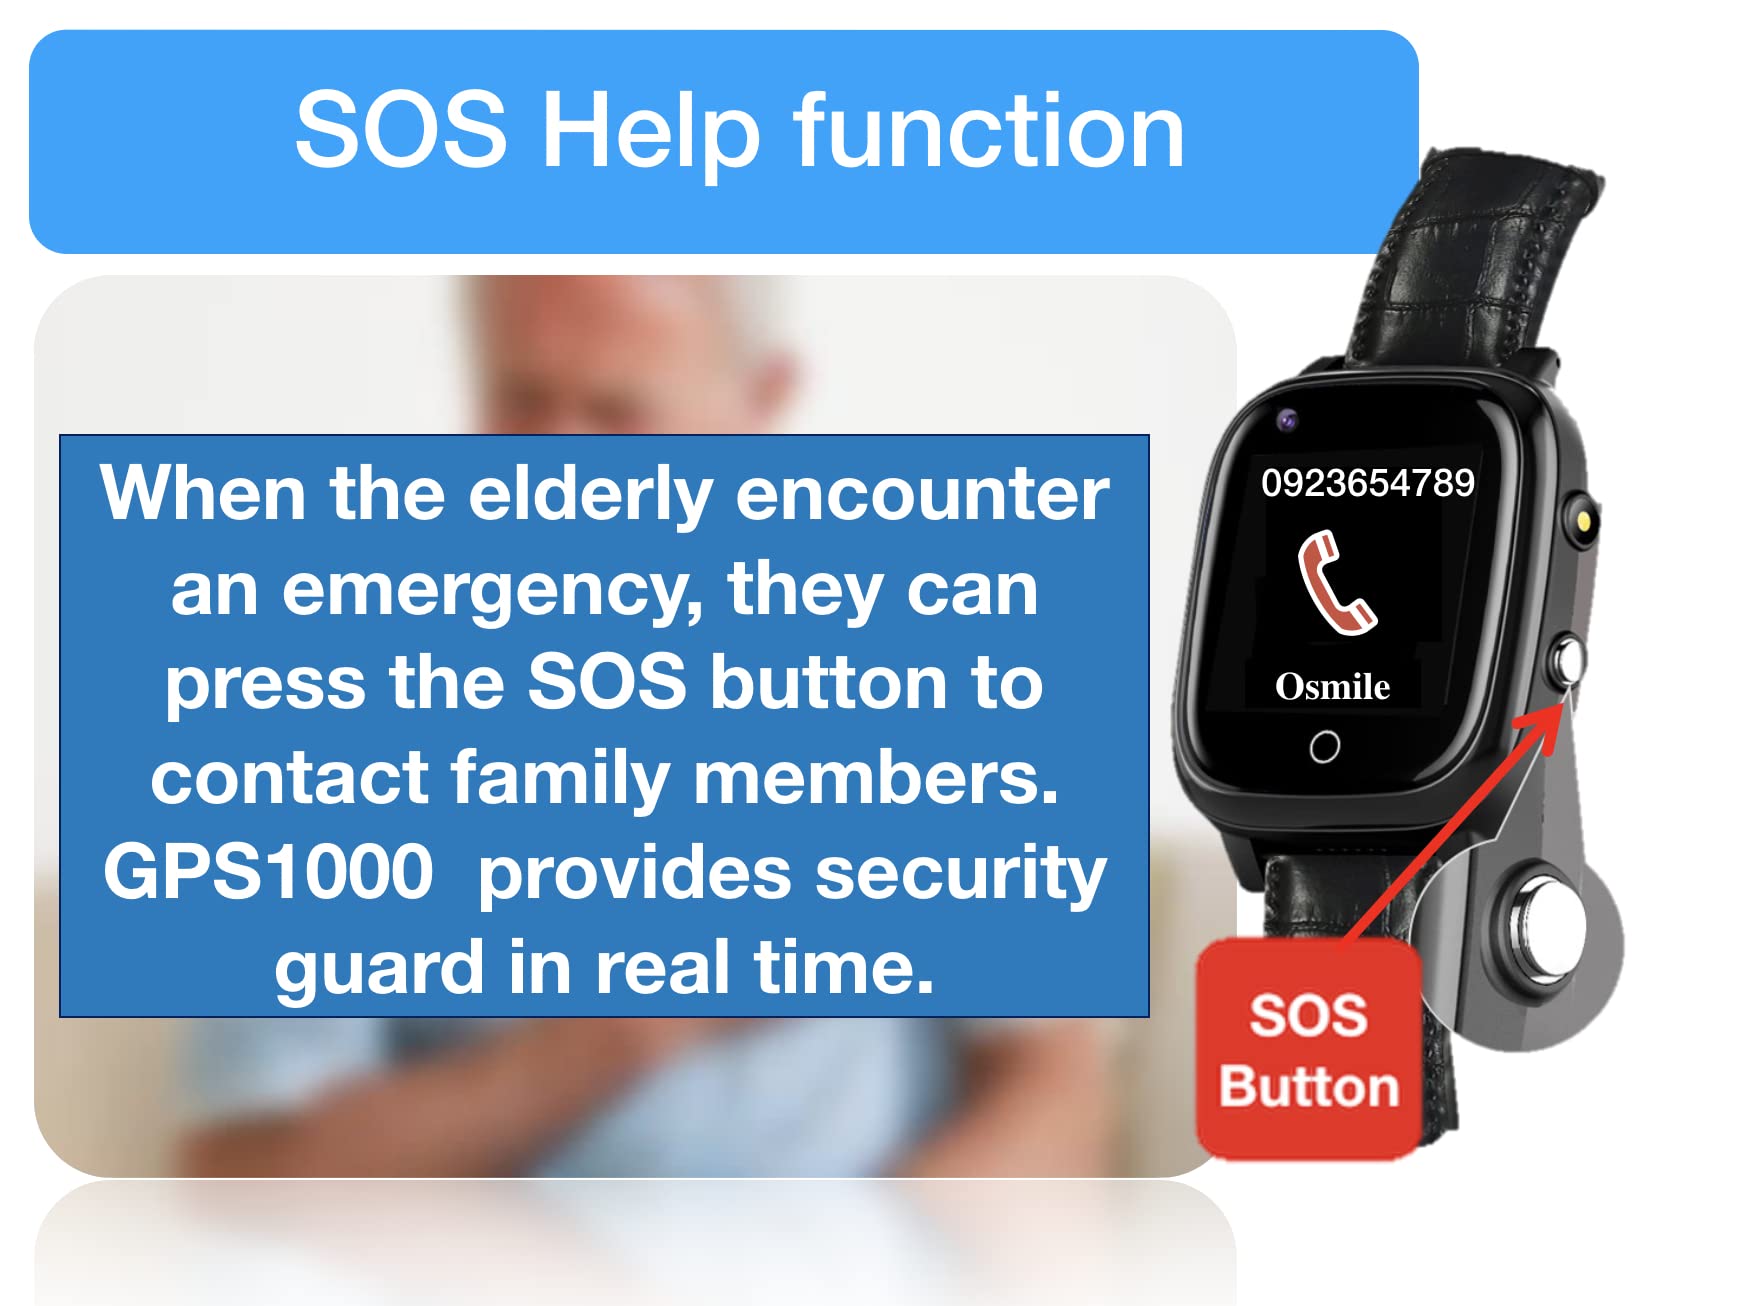 Osmile ED1000 GPS Tracker for Dementia Patients, Seniors Living Alone or with Other Disabilities (Anti-Lost GPS Watch for Elderly & Kids with Fall Alert, SOS Button, Tracking, and Geofence) (L)